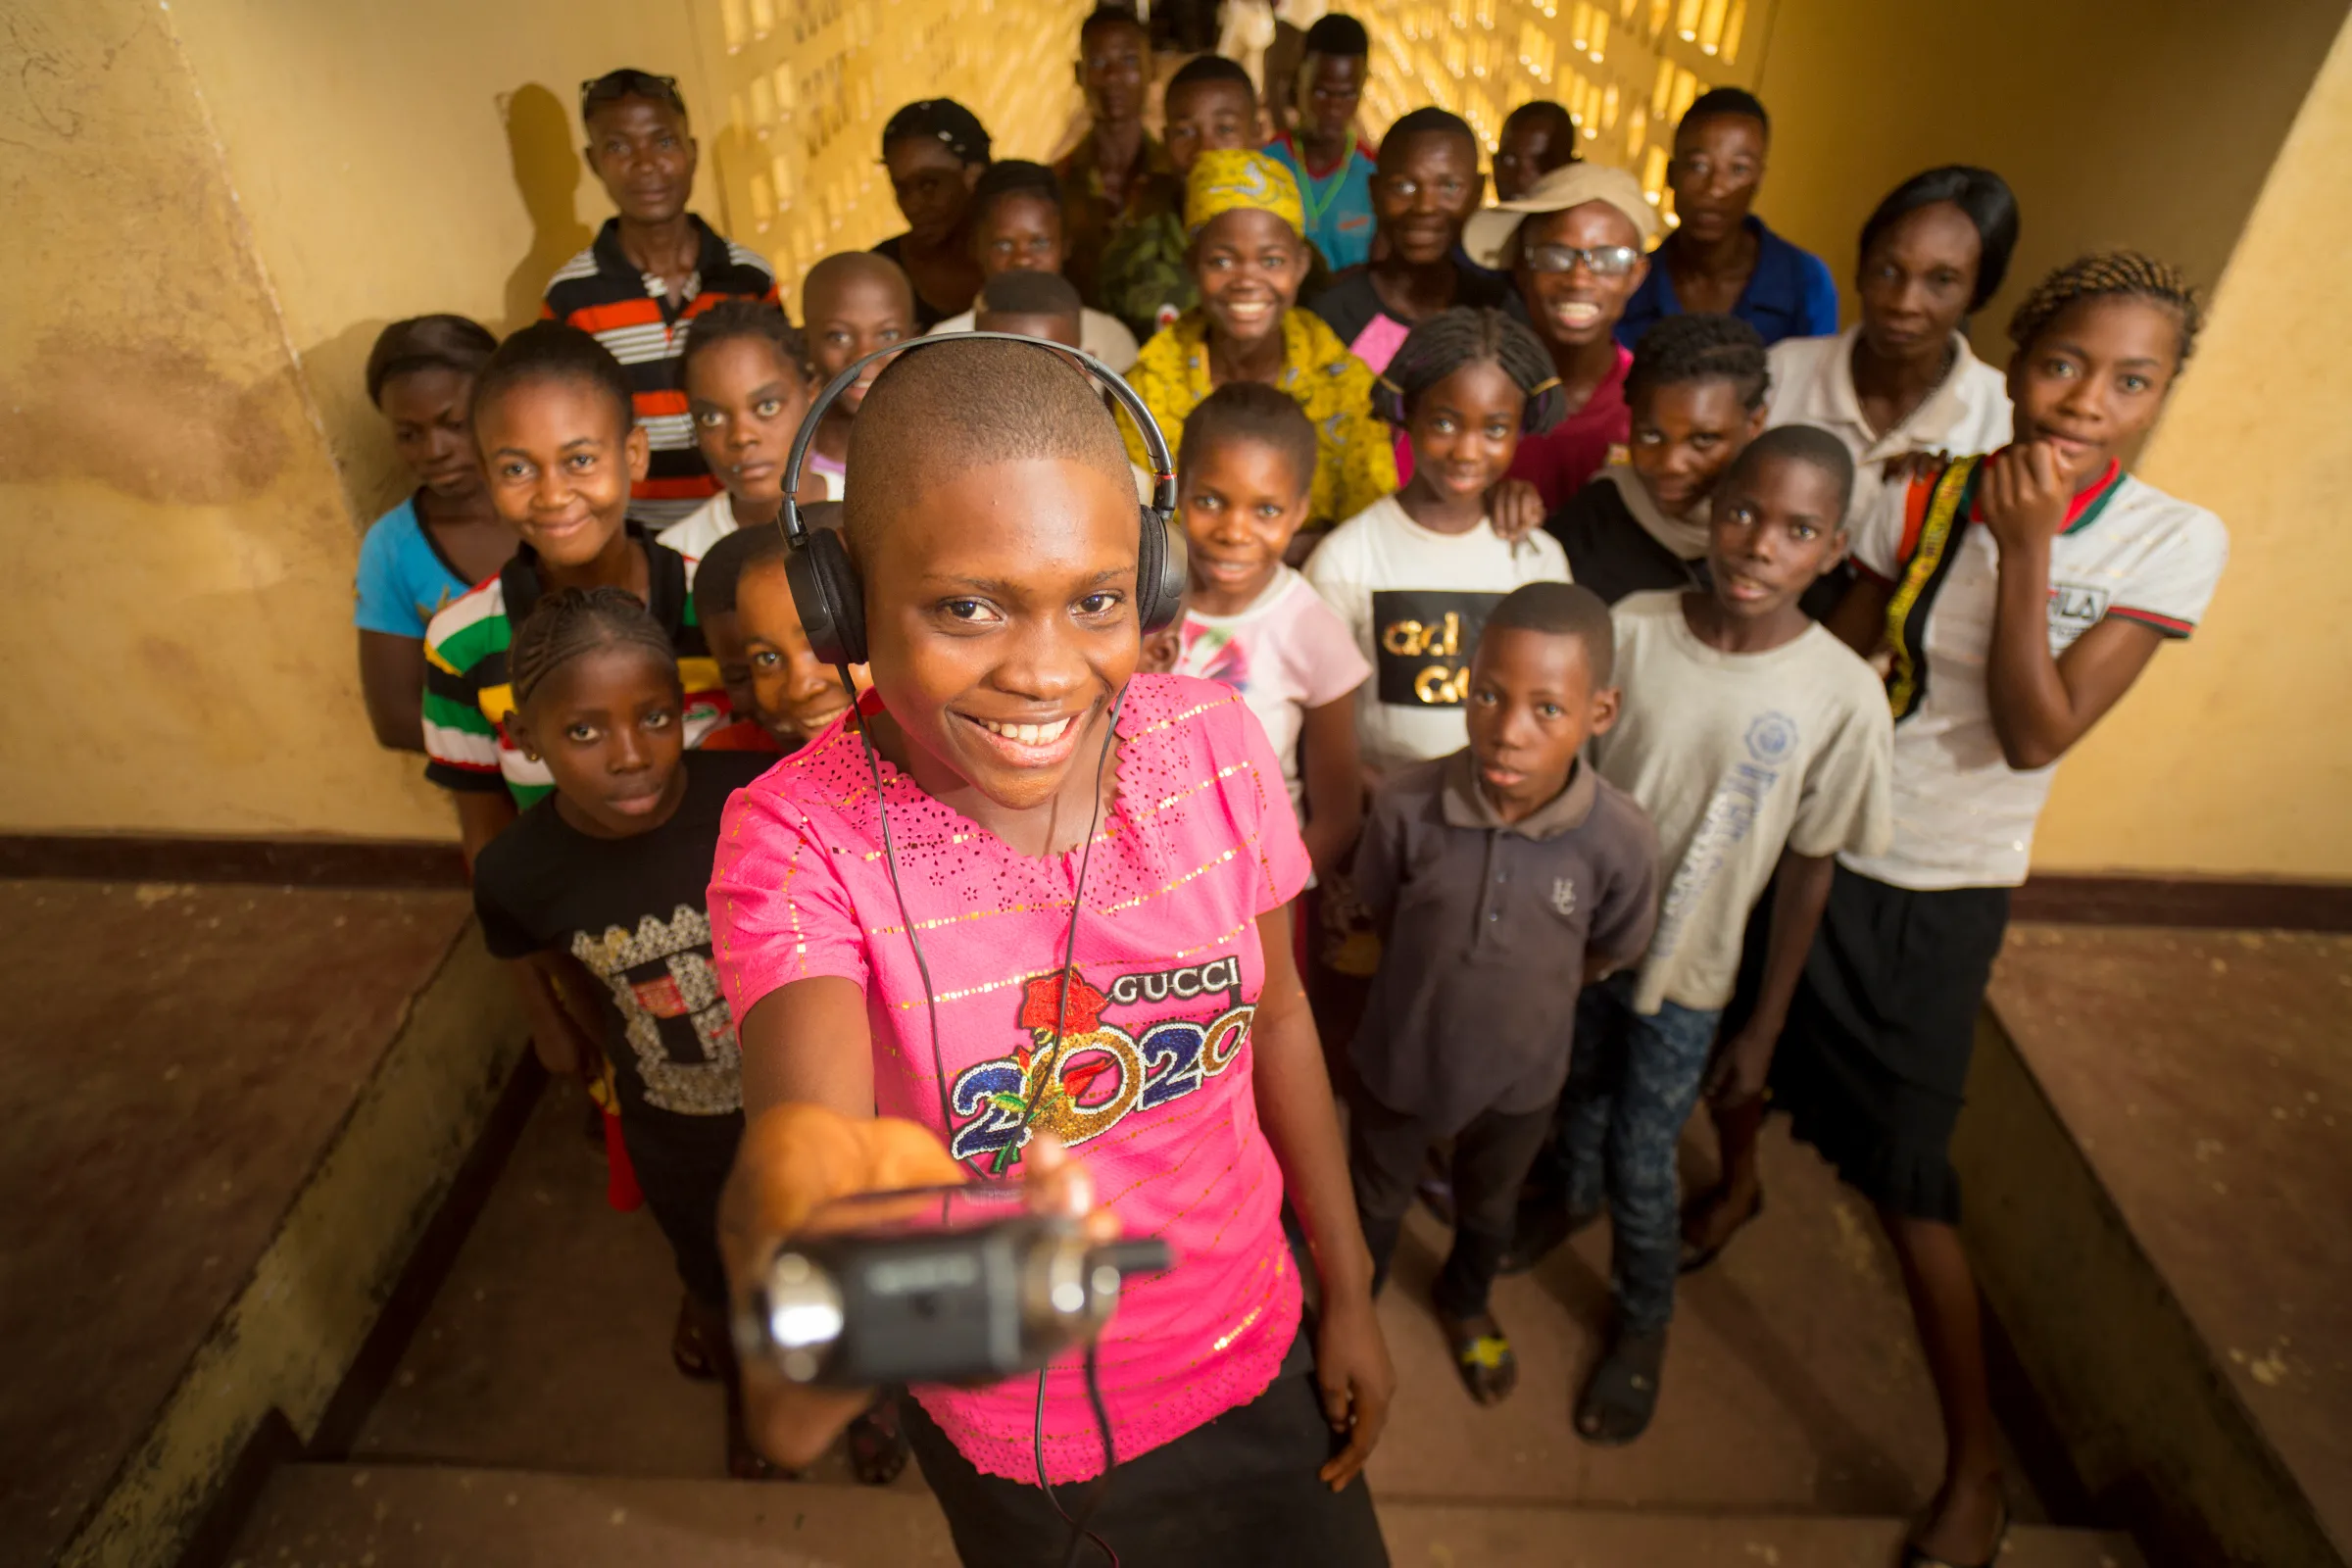 A young reporter smiles at the camera with a recorder in her hand while members of her community gather behind her in Kinshasa, The Democratic Republic of Congo, June 28, 2016. Rowan Pybus/Handout via Thomson Reuters Foundation